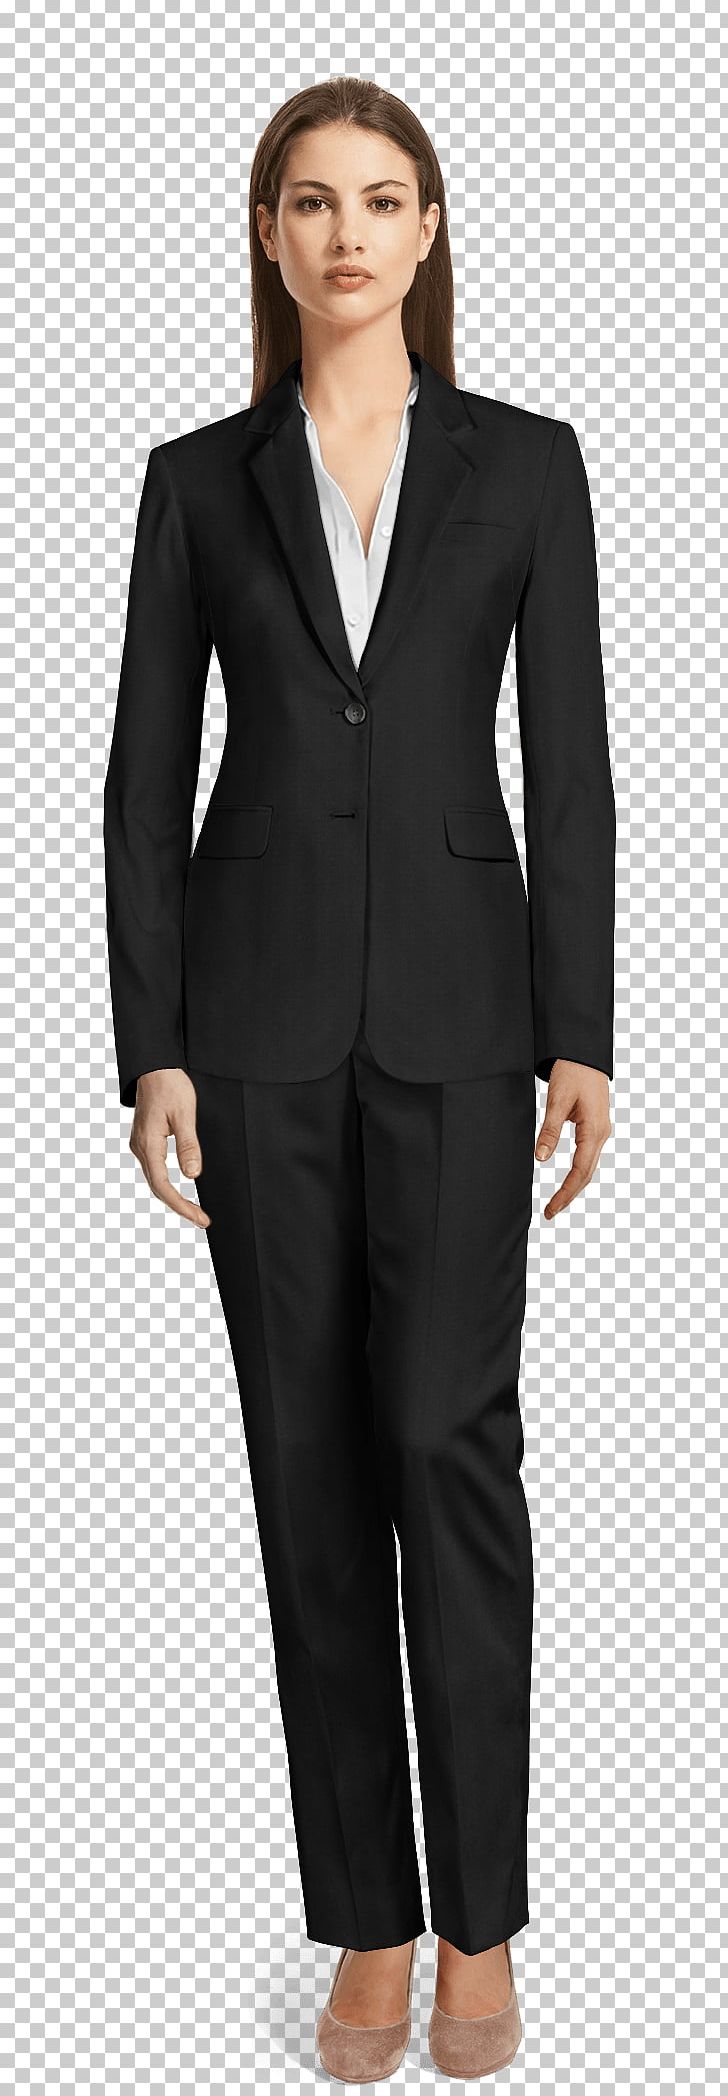 Tuxedo Pant Suits Jakkupuku Clothing PNG, Clipart, Blazer, Blue, Business, Businessperson, Clothing Free PNG Download